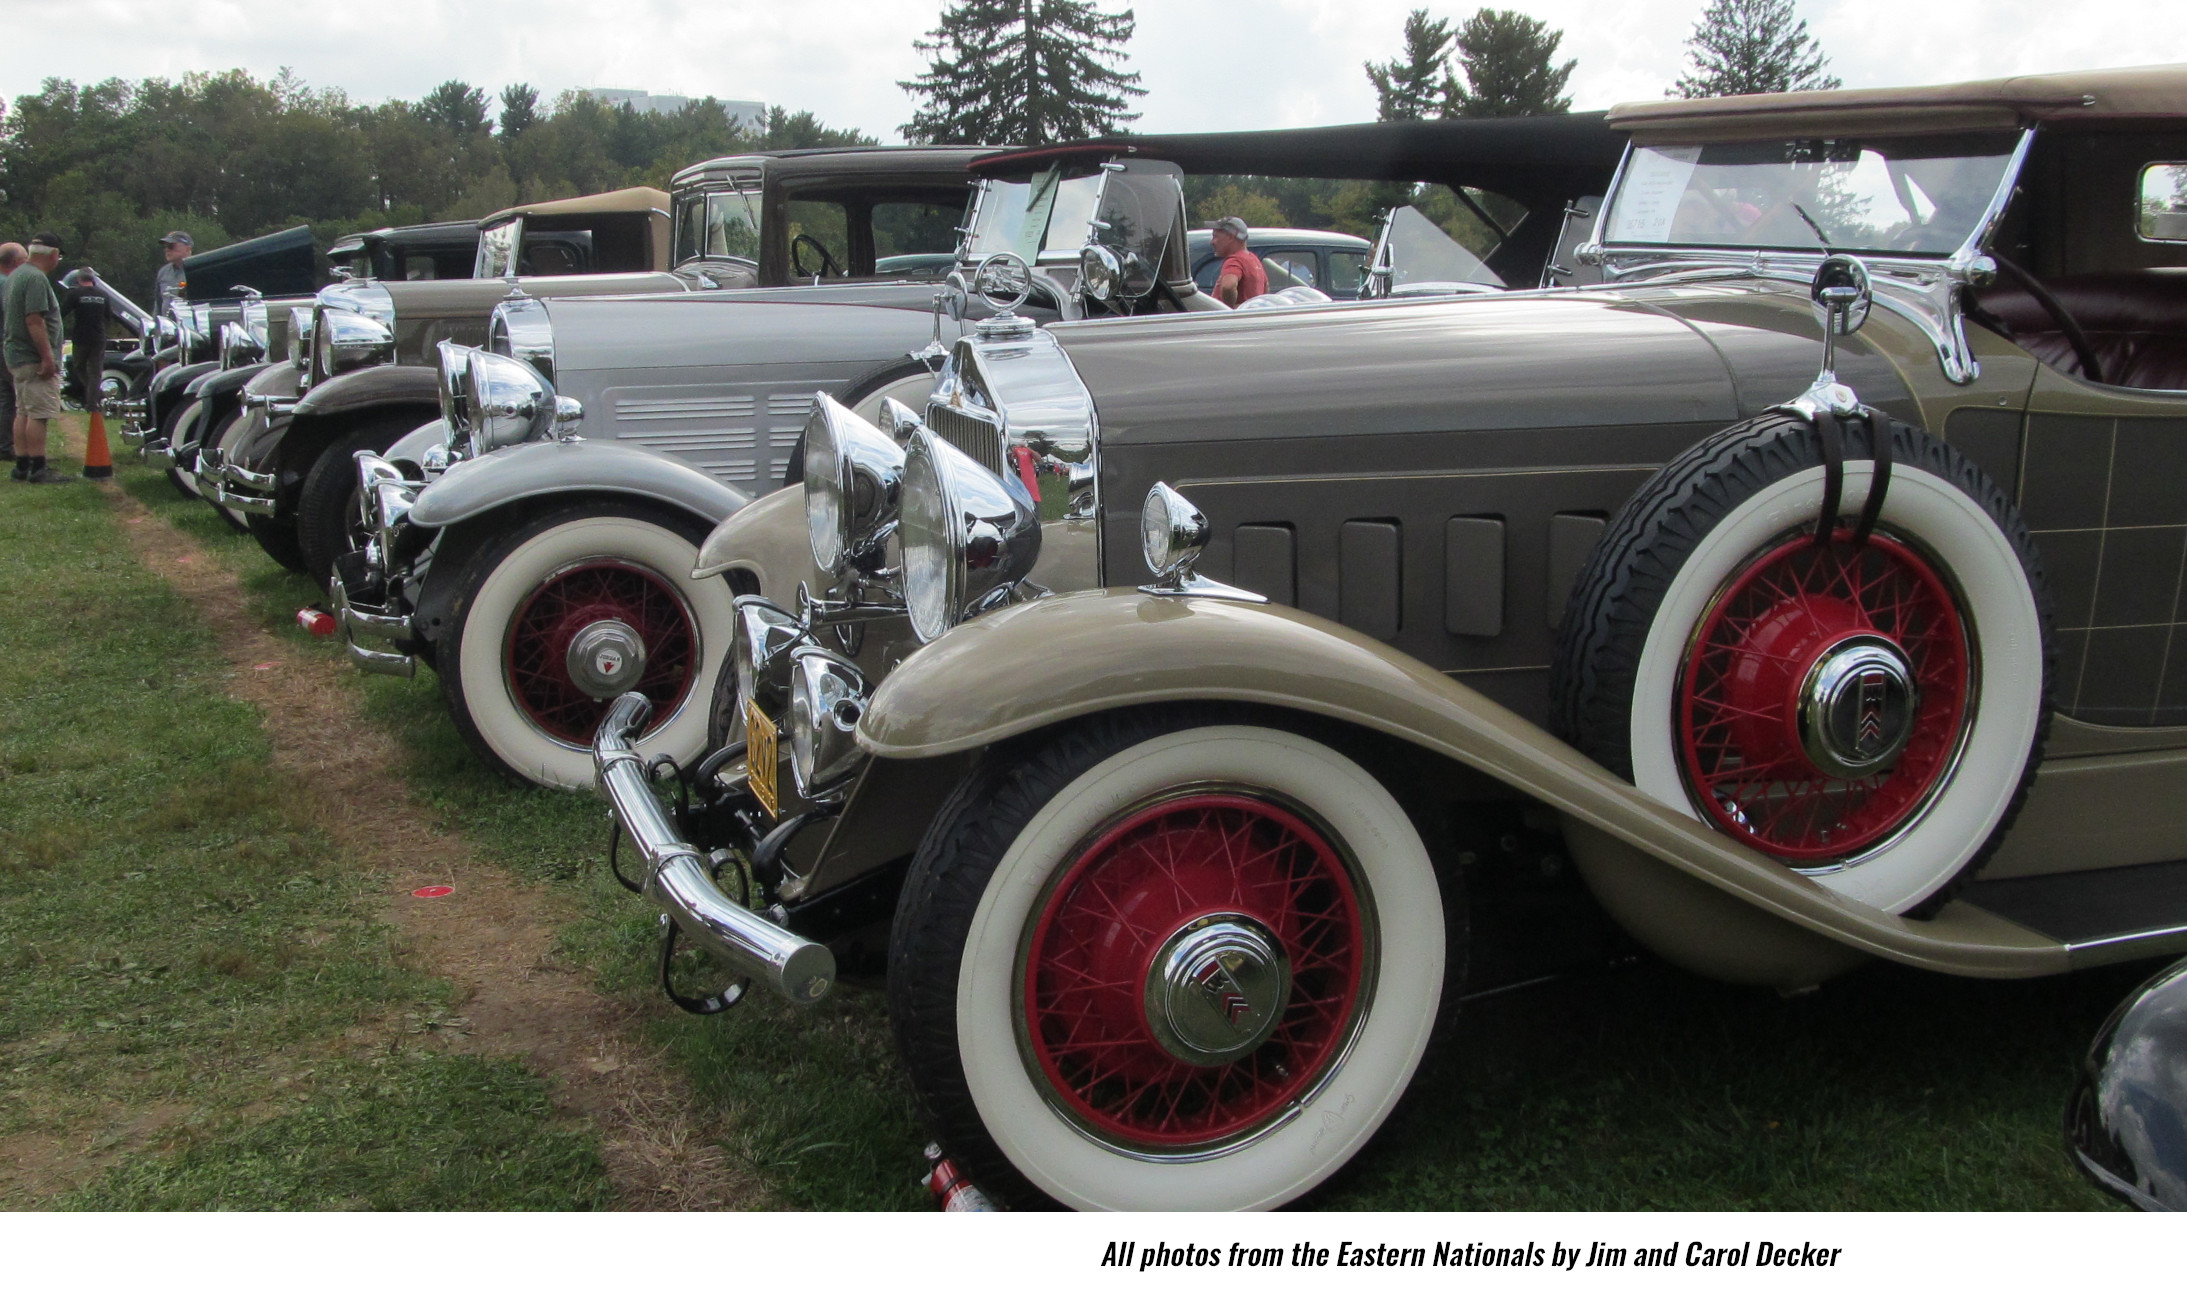 Ten Area Car Enthusiasts Named Winners at Hershey Show